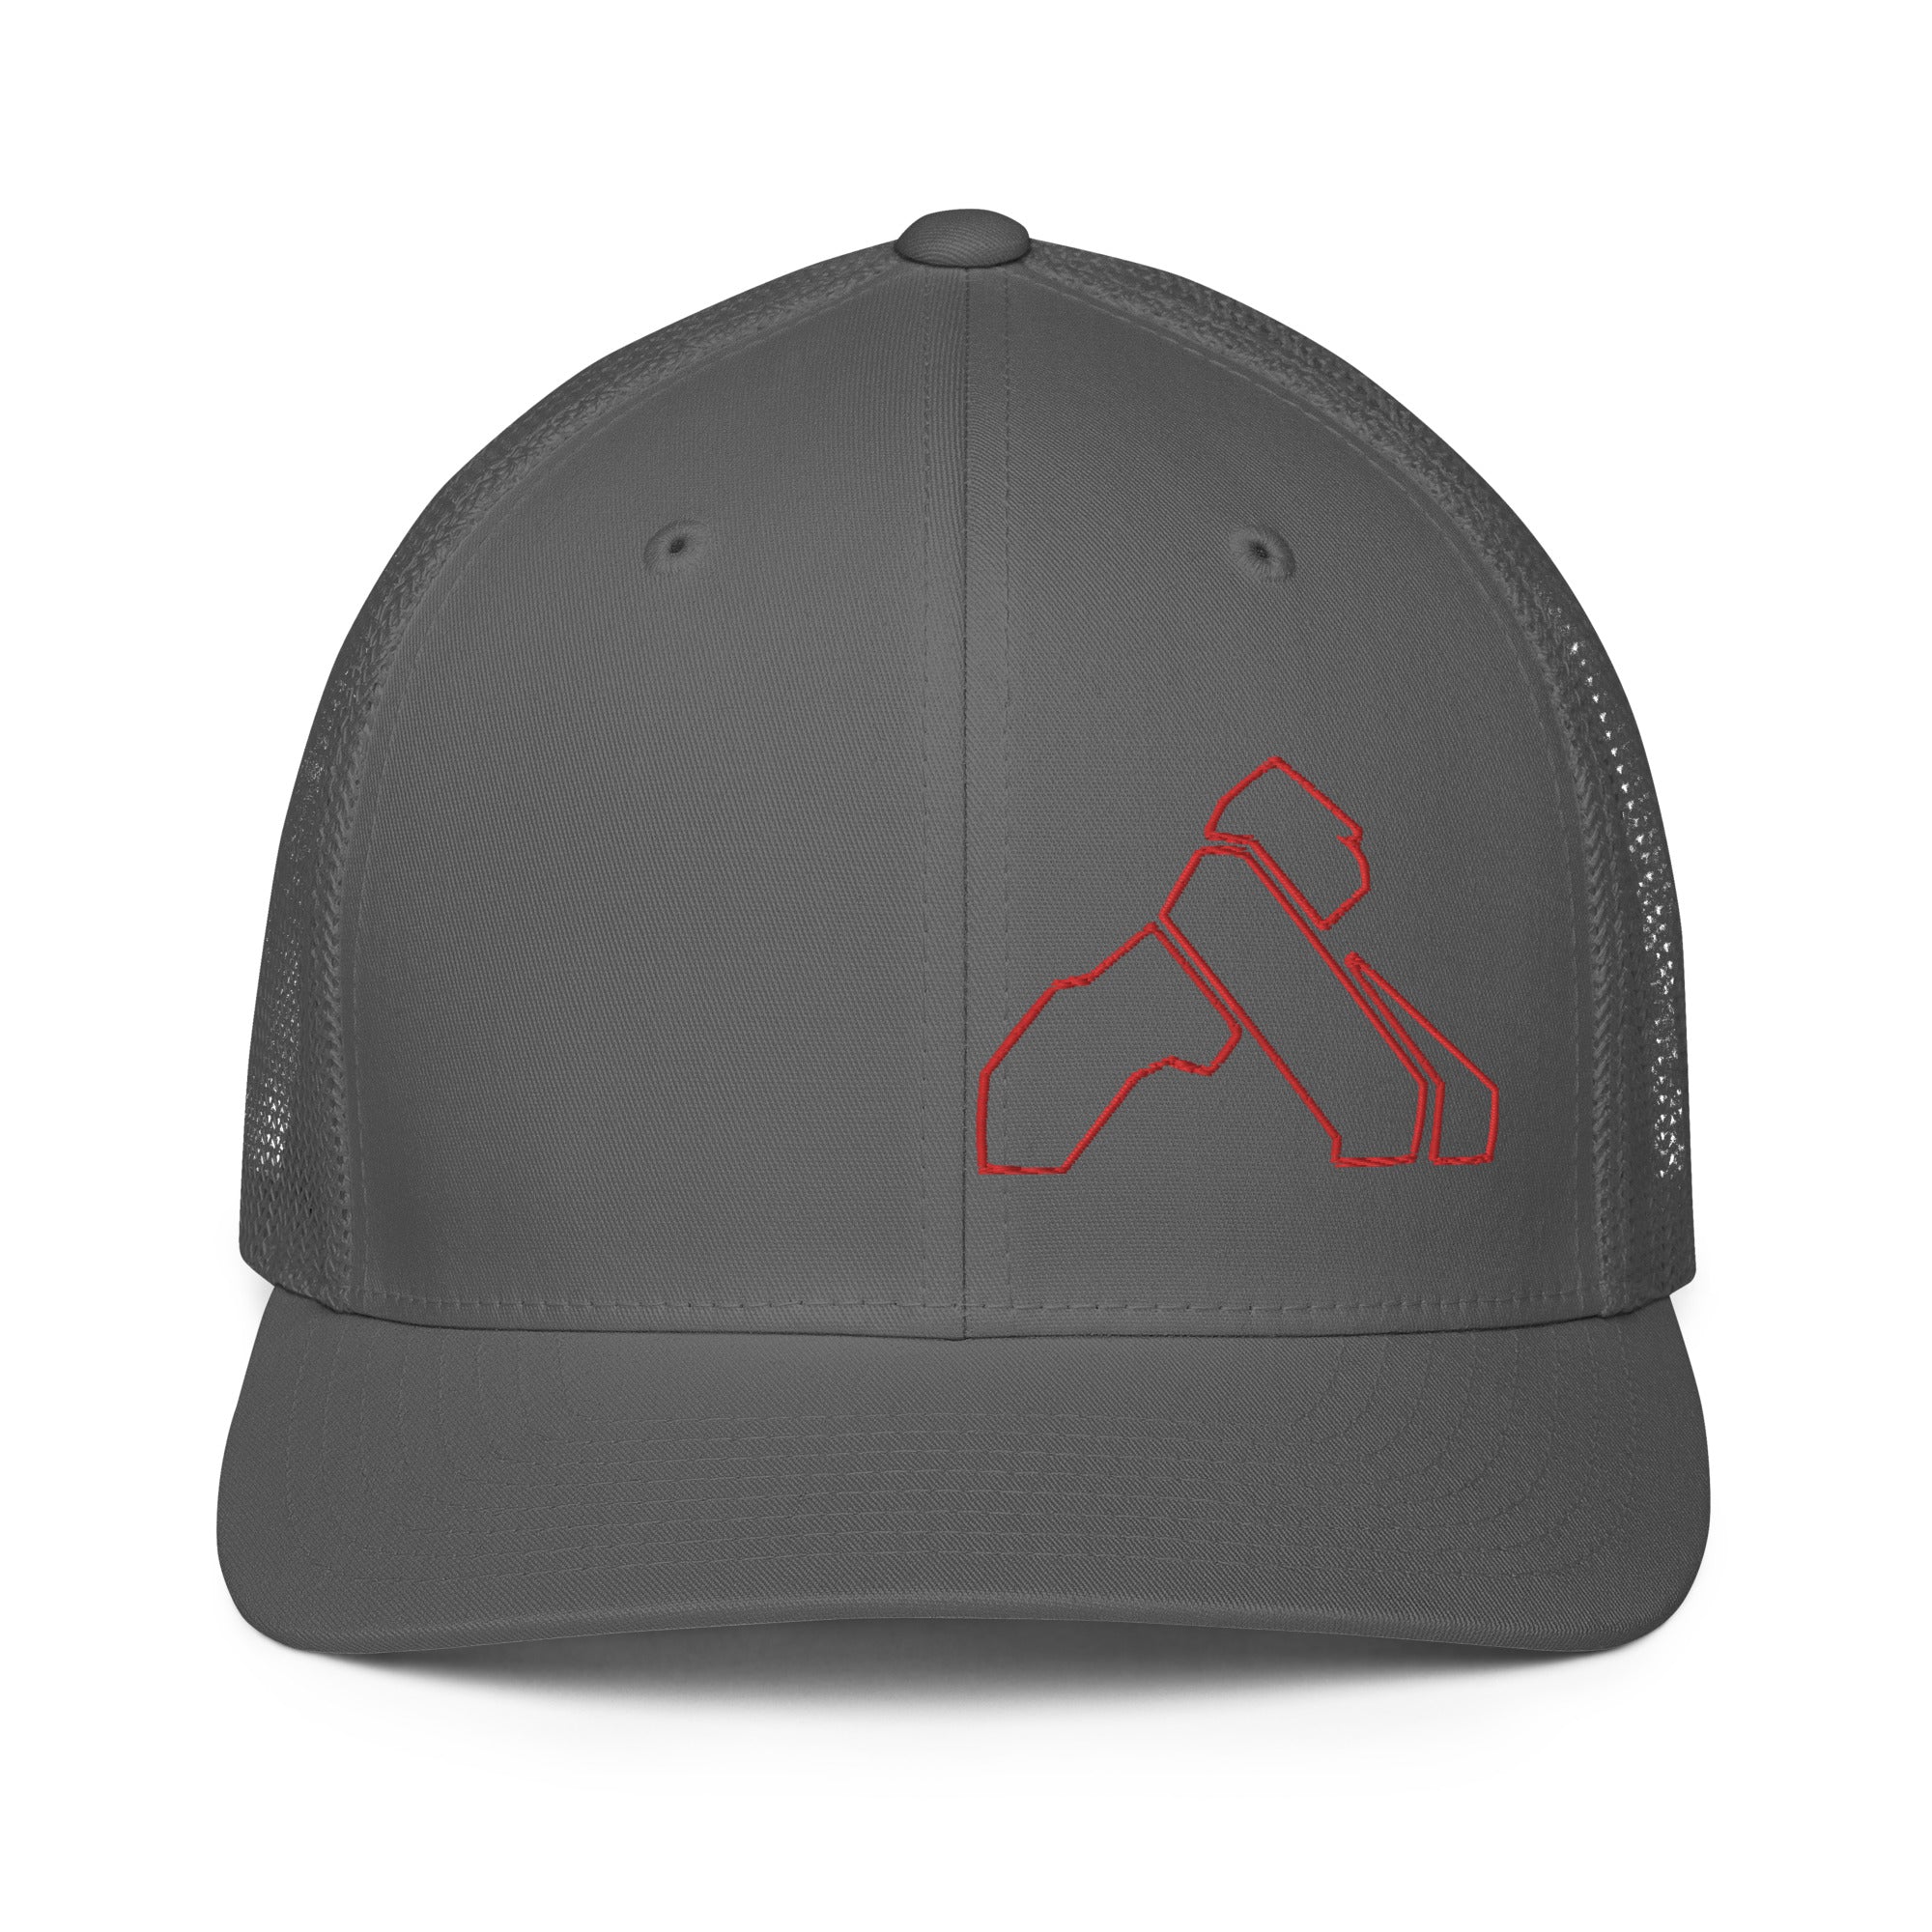 KONG Fitted Mesh Hat